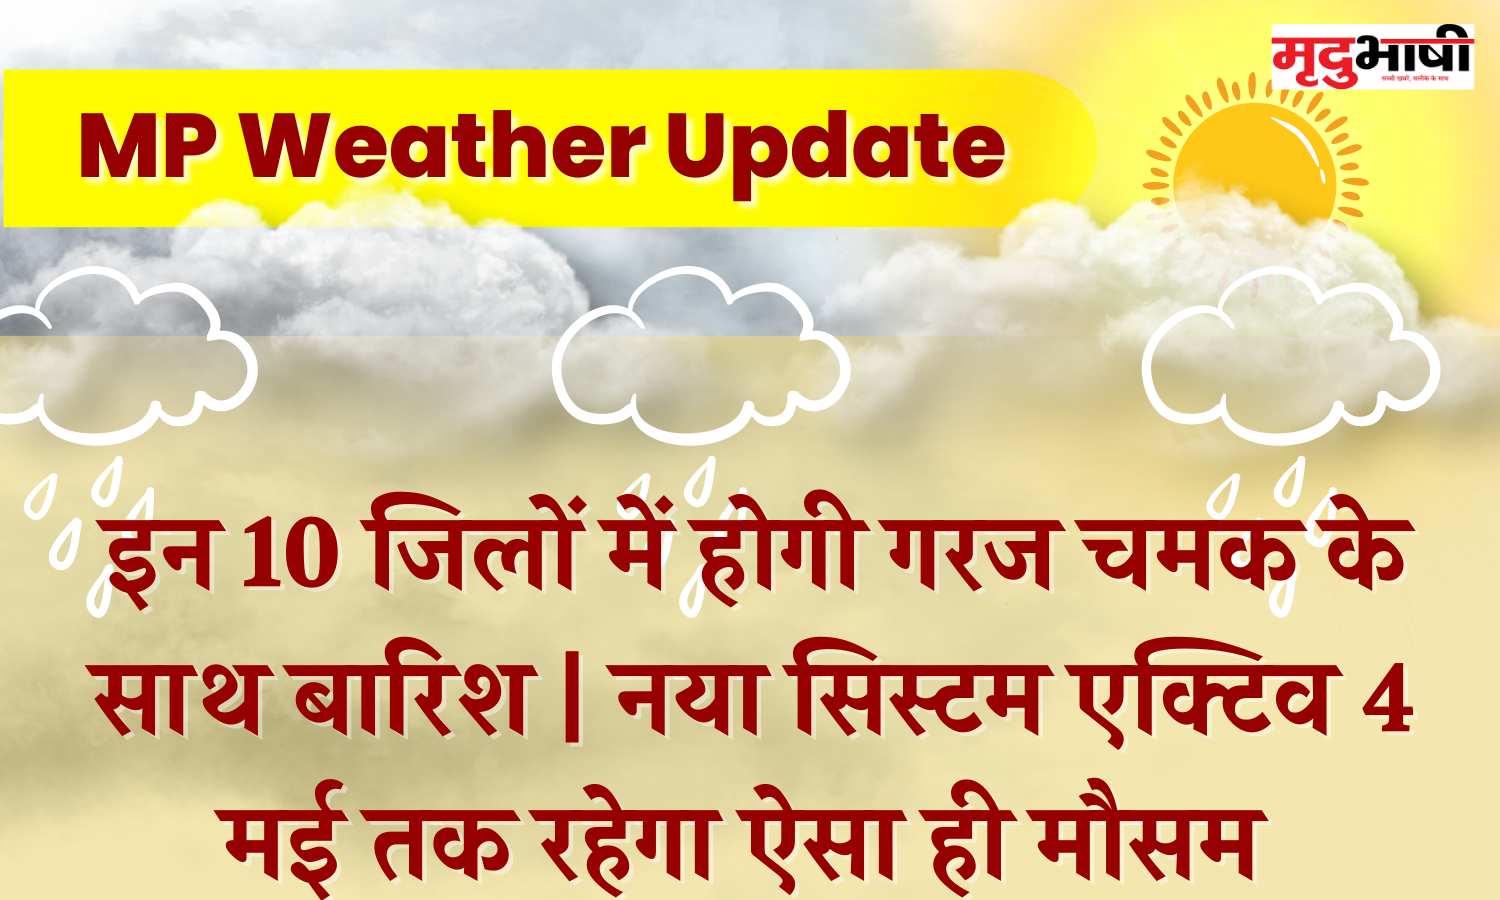 MP Weather Update: New system becoming active again after 2 days